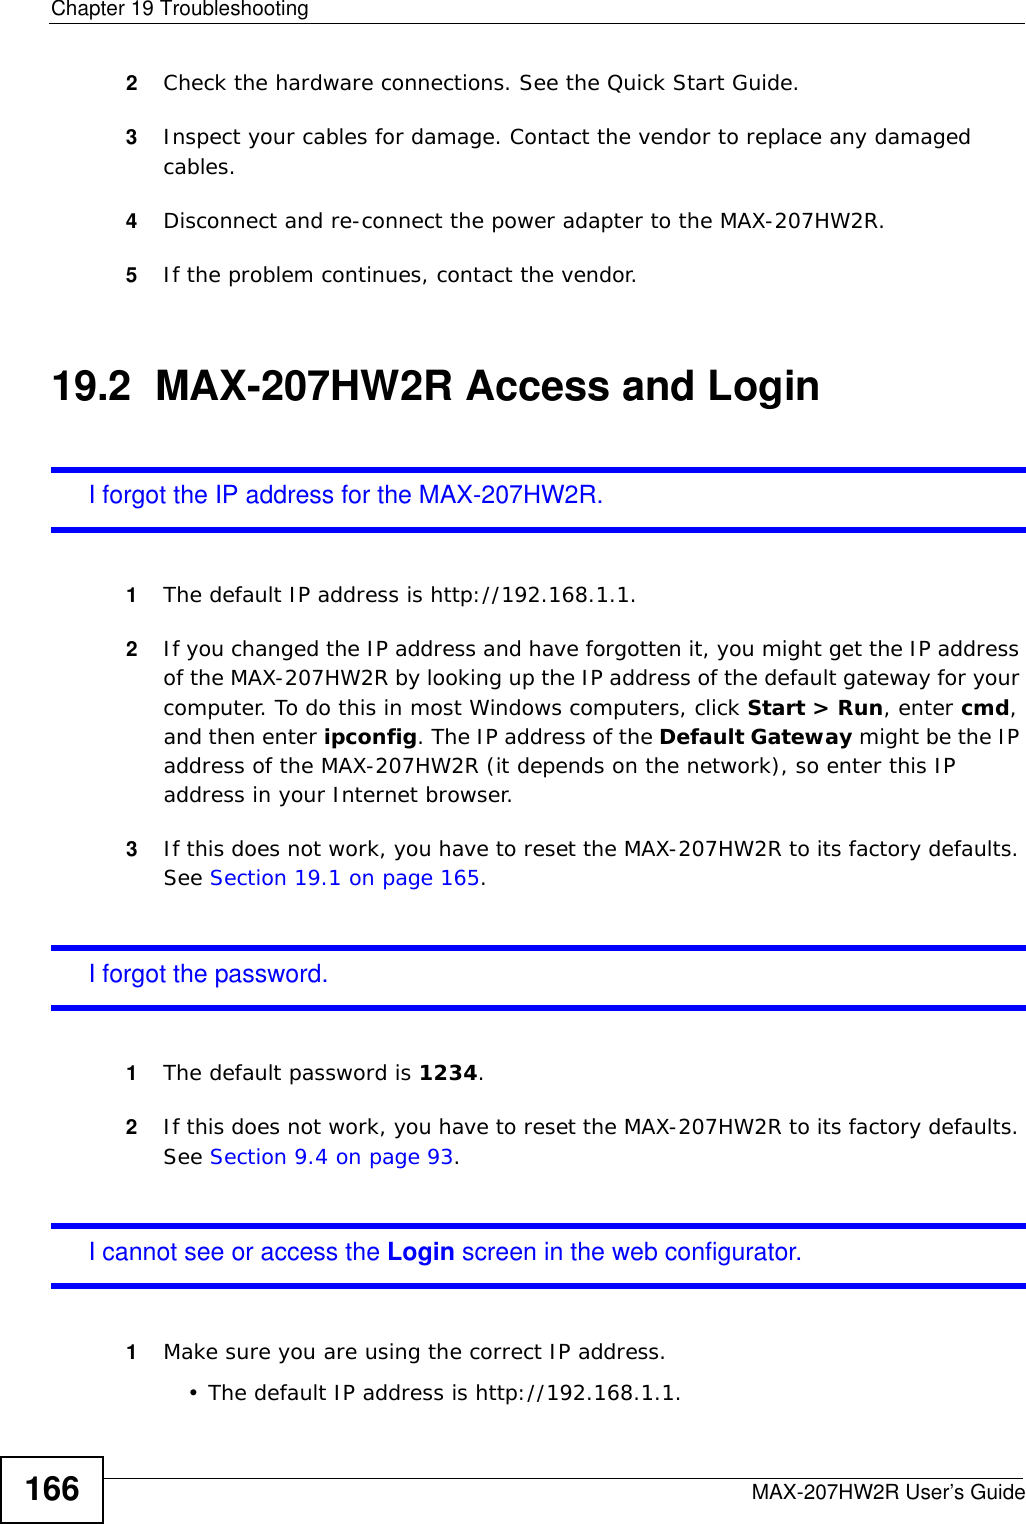 Chapter 19 TroubleshootingMAX-207HW2R User’s Guide1662Check the hardware connections. See the Quick Start Guide.3Inspect your cables for damage. Contact the vendor to replace any damaged cables.4Disconnect and re-connect the power adapter to the MAX-207HW2R.5If the problem continues, contact the vendor.19.2  MAX-207HW2R Access and LoginI forgot the IP address for the MAX-207HW2R.1The default IP address is http://192.168.1.1.2If you changed the IP address and have forgotten it, you might get the IP address of the MAX-207HW2R by looking up the IP address of the default gateway for your computer. To do this in most Windows computers, click Start &gt; Run, enter cmd, and then enter ipconfig. The IP address of the Default Gateway might be the IP address of the MAX-207HW2R (it depends on the network), so enter this IP address in your Internet browser.3If this does not work, you have to reset the MAX-207HW2R to its factory defaults. See Section 19.1 on page 165.I forgot the password.1The default password is 1234.2If this does not work, you have to reset the MAX-207HW2R to its factory defaults. See Section 9.4 on page 93.I cannot see or access the Login screen in the web configurator.1Make sure you are using the correct IP address.• The default IP address is http://192.168.1.1.